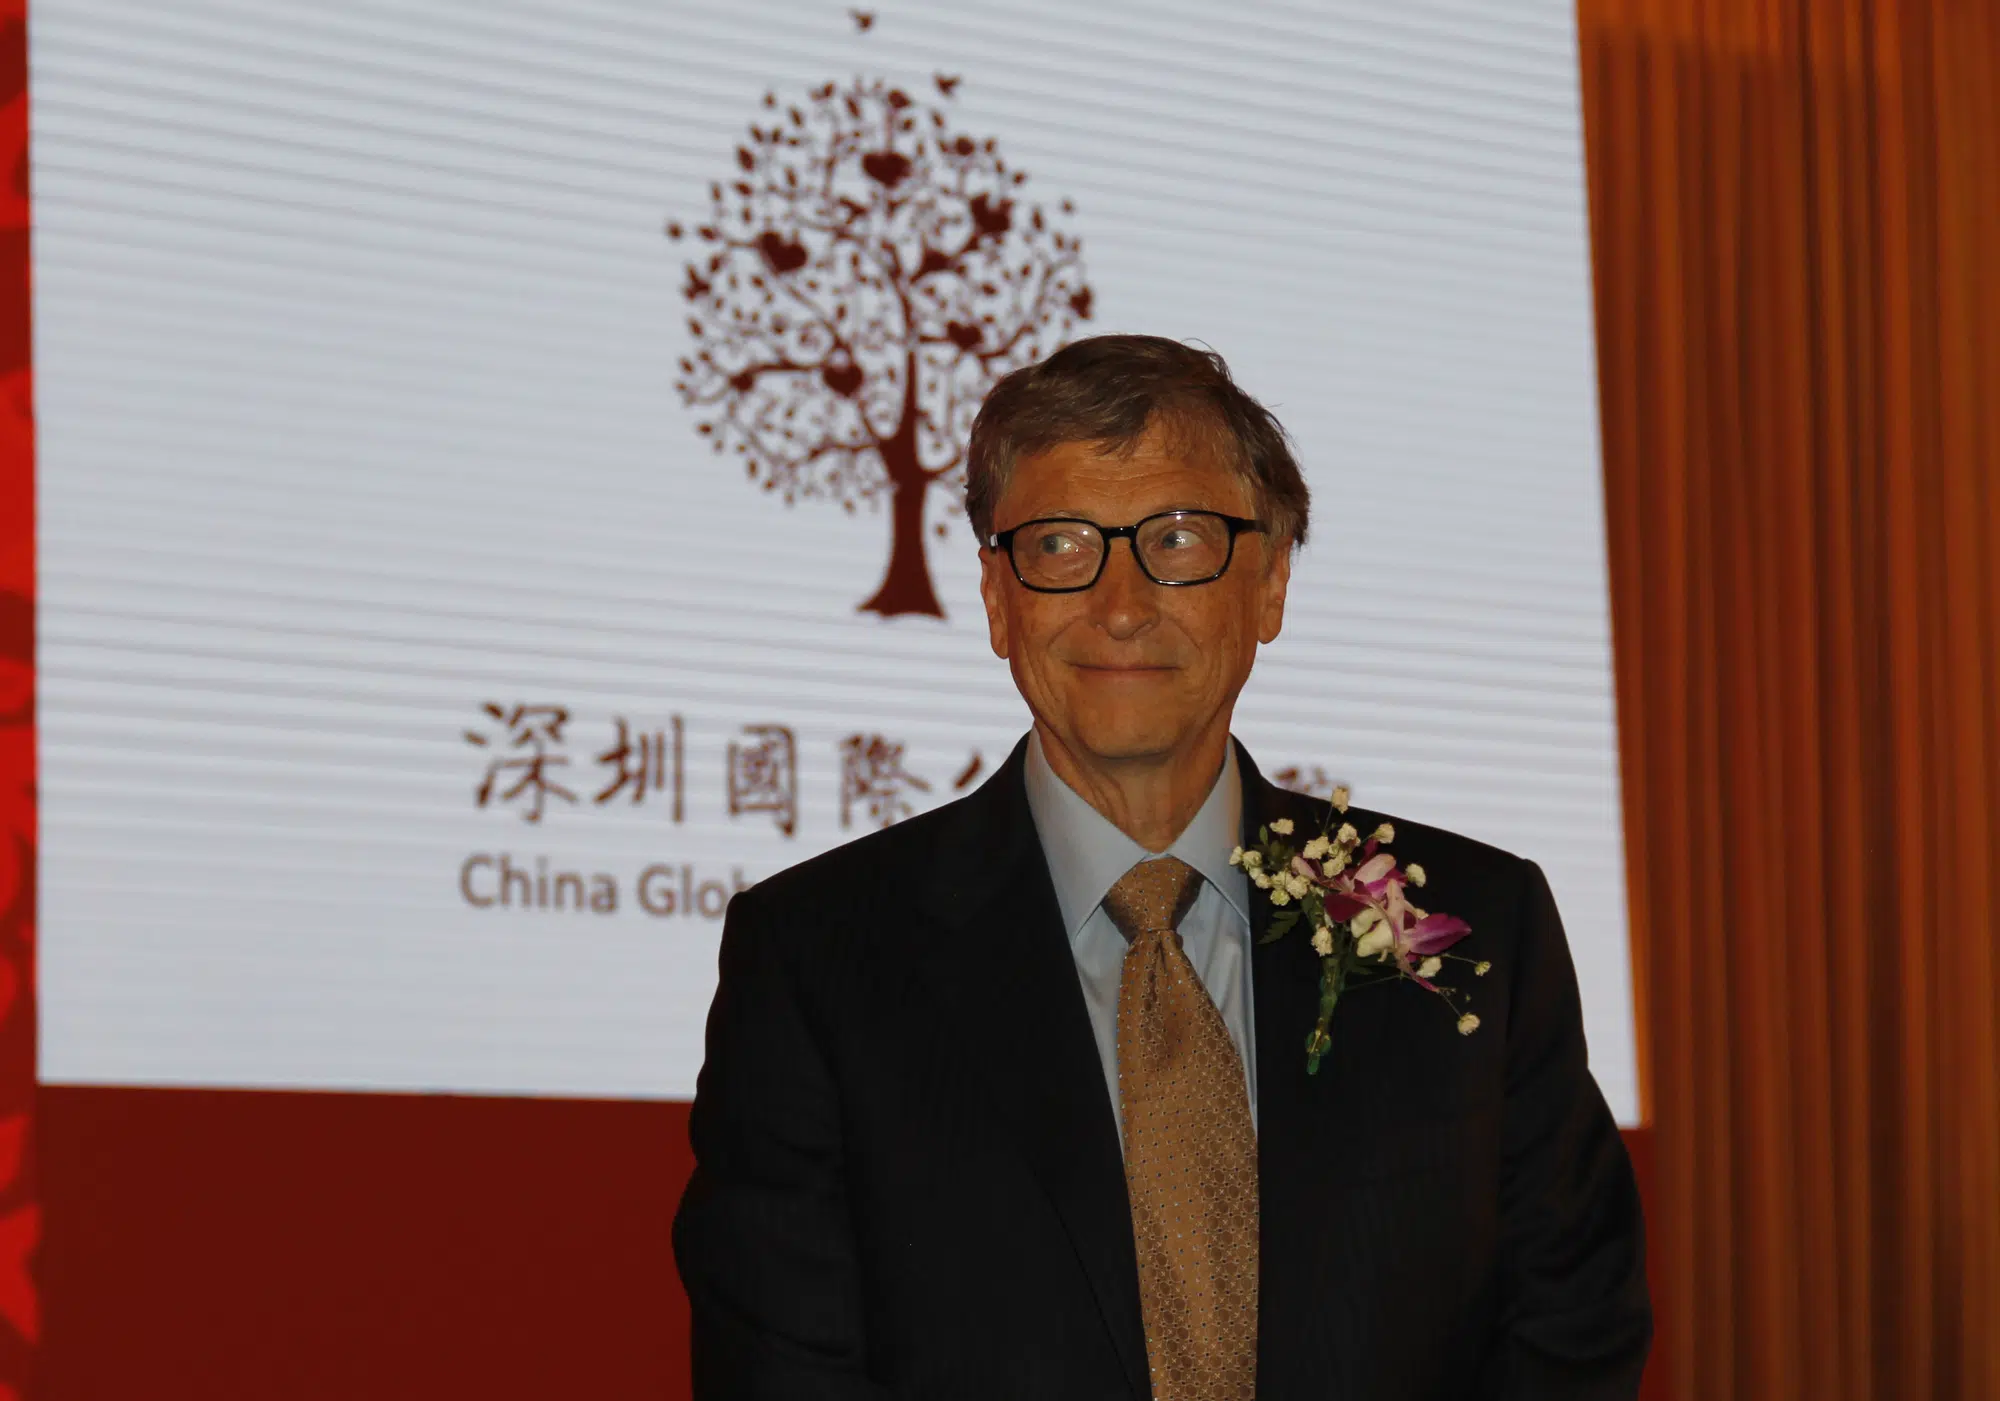 Bill Gates and Jack Ma Yun highlight inauguration ceremony of China Global Philanthropy Institute in Beijing